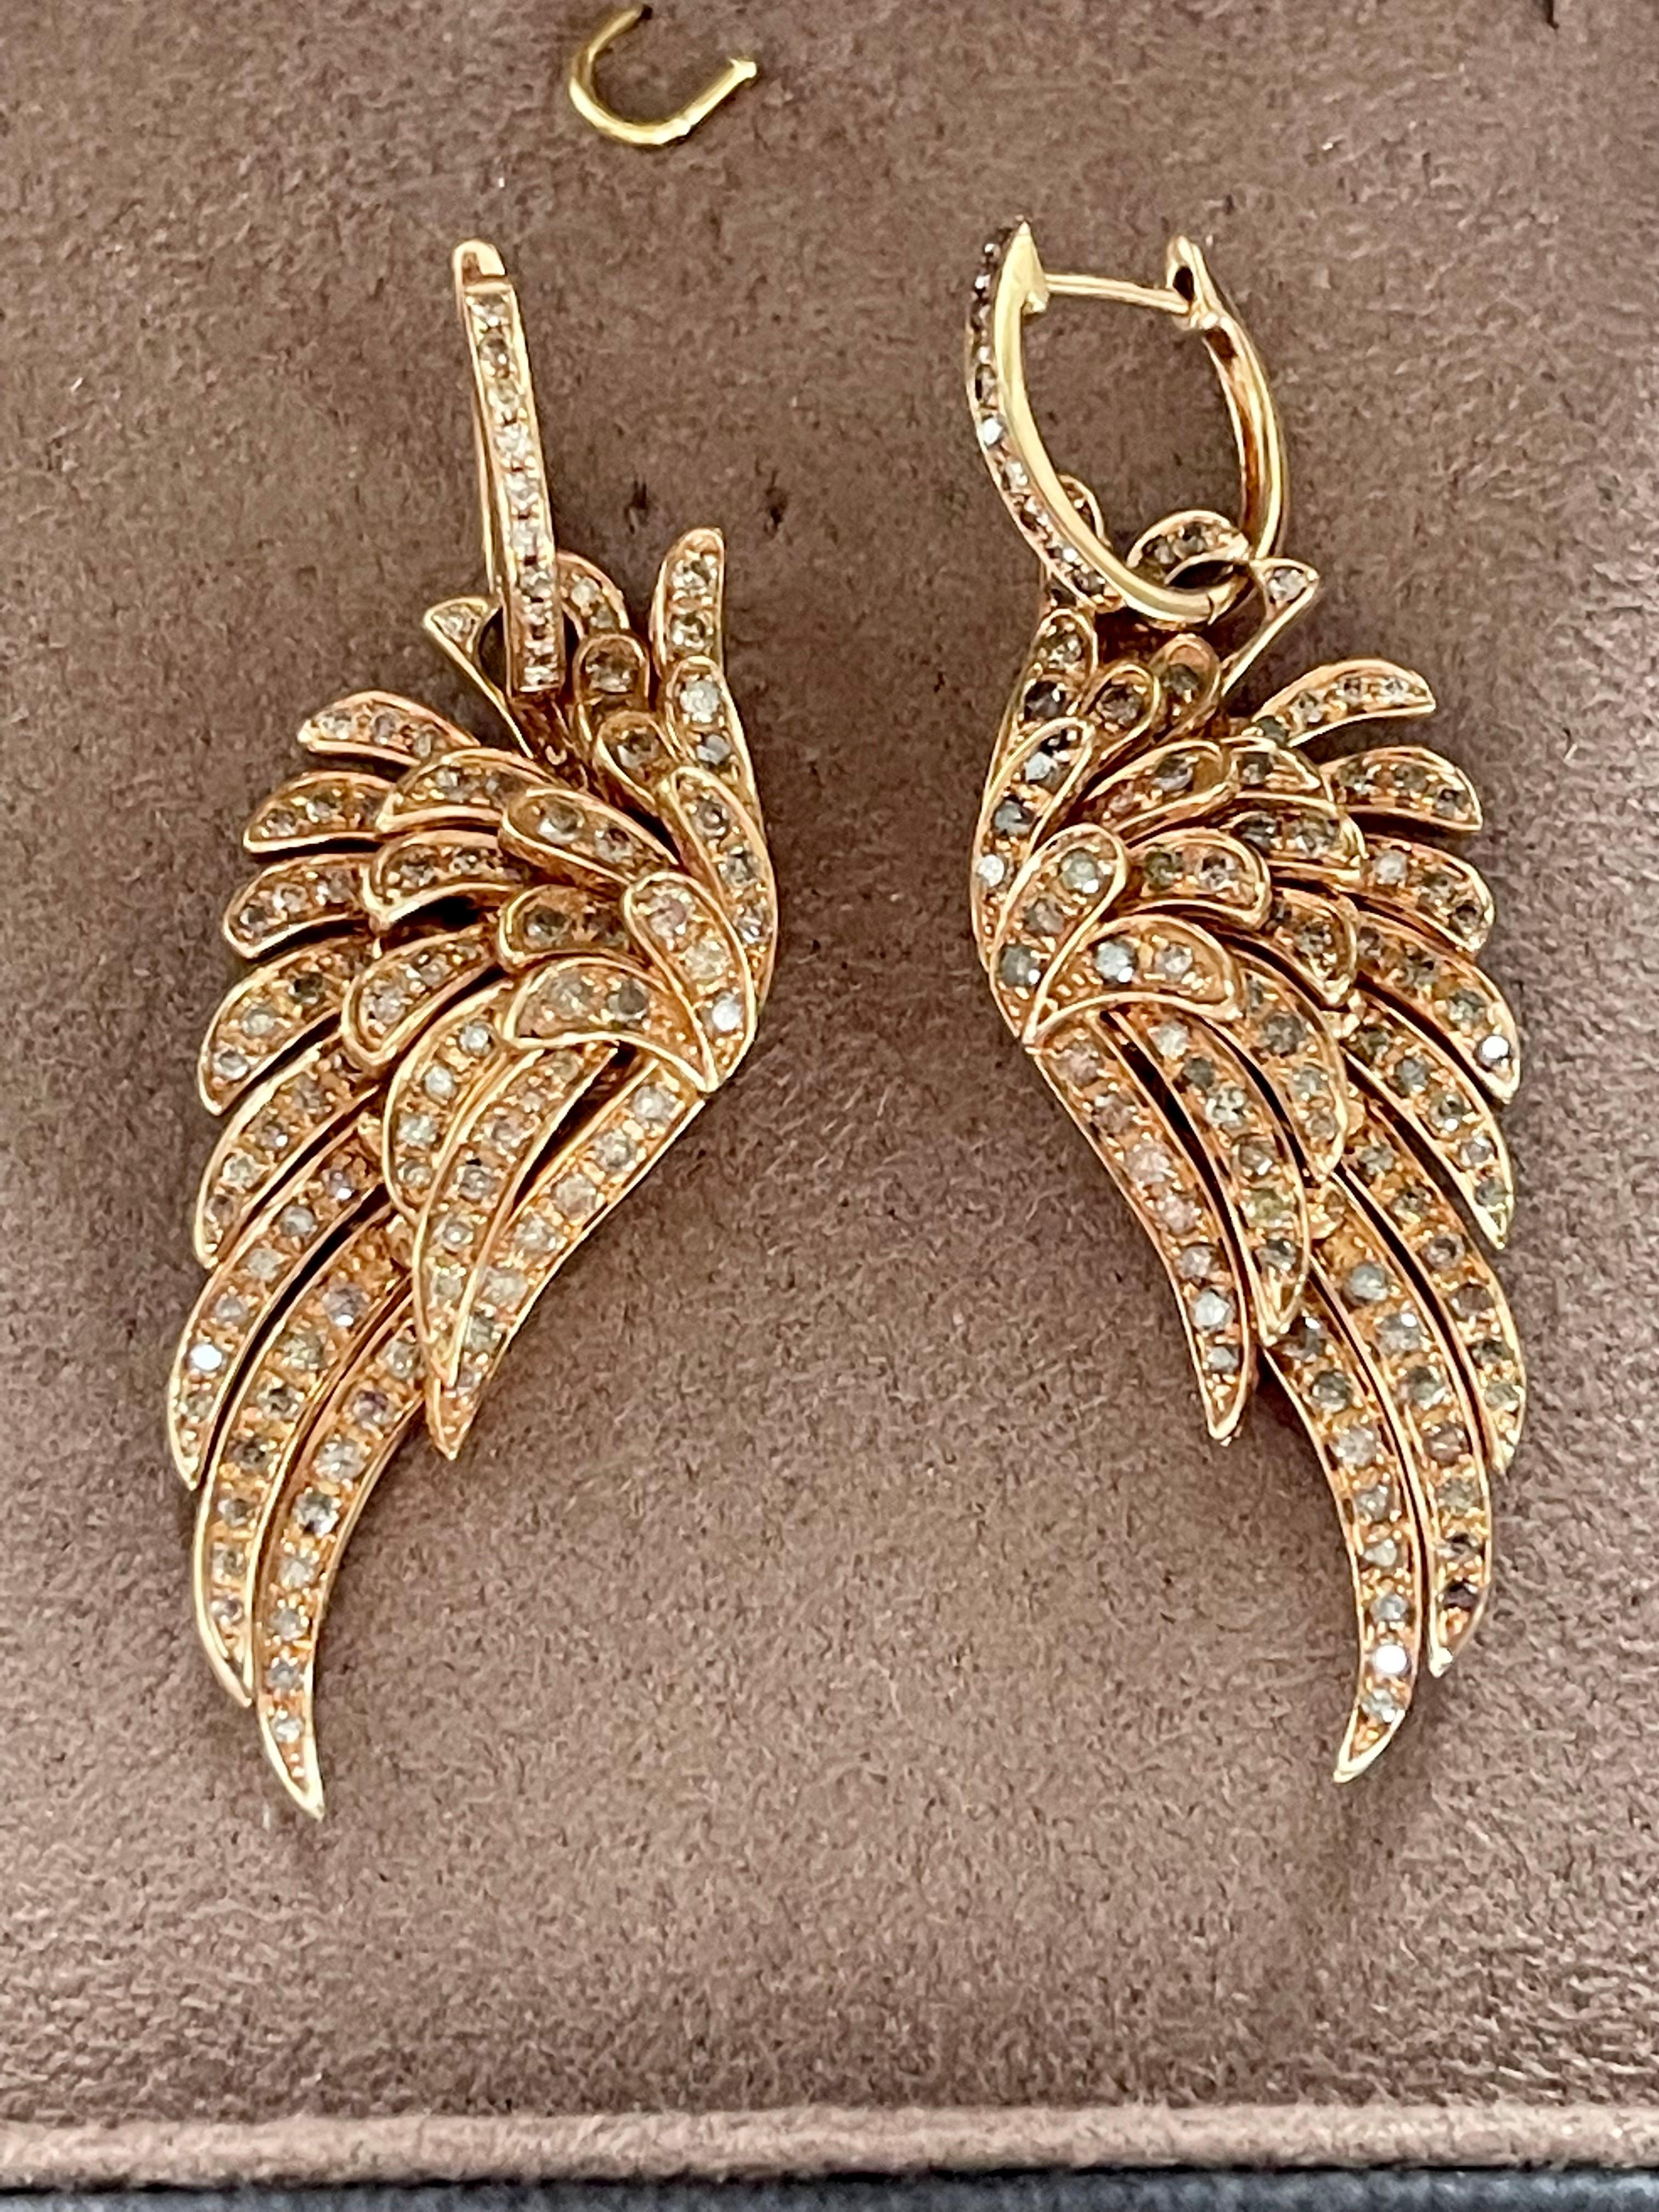 A pair of lovely 18 K rose Gold Angel wing earrings featuring 206 brown brilliant cut Diamonds weighing 1.71 ct. 
Masterfully handcrafted piece! Authenticity and money back is guaranteed.
For any enquires, please contact the seller through the